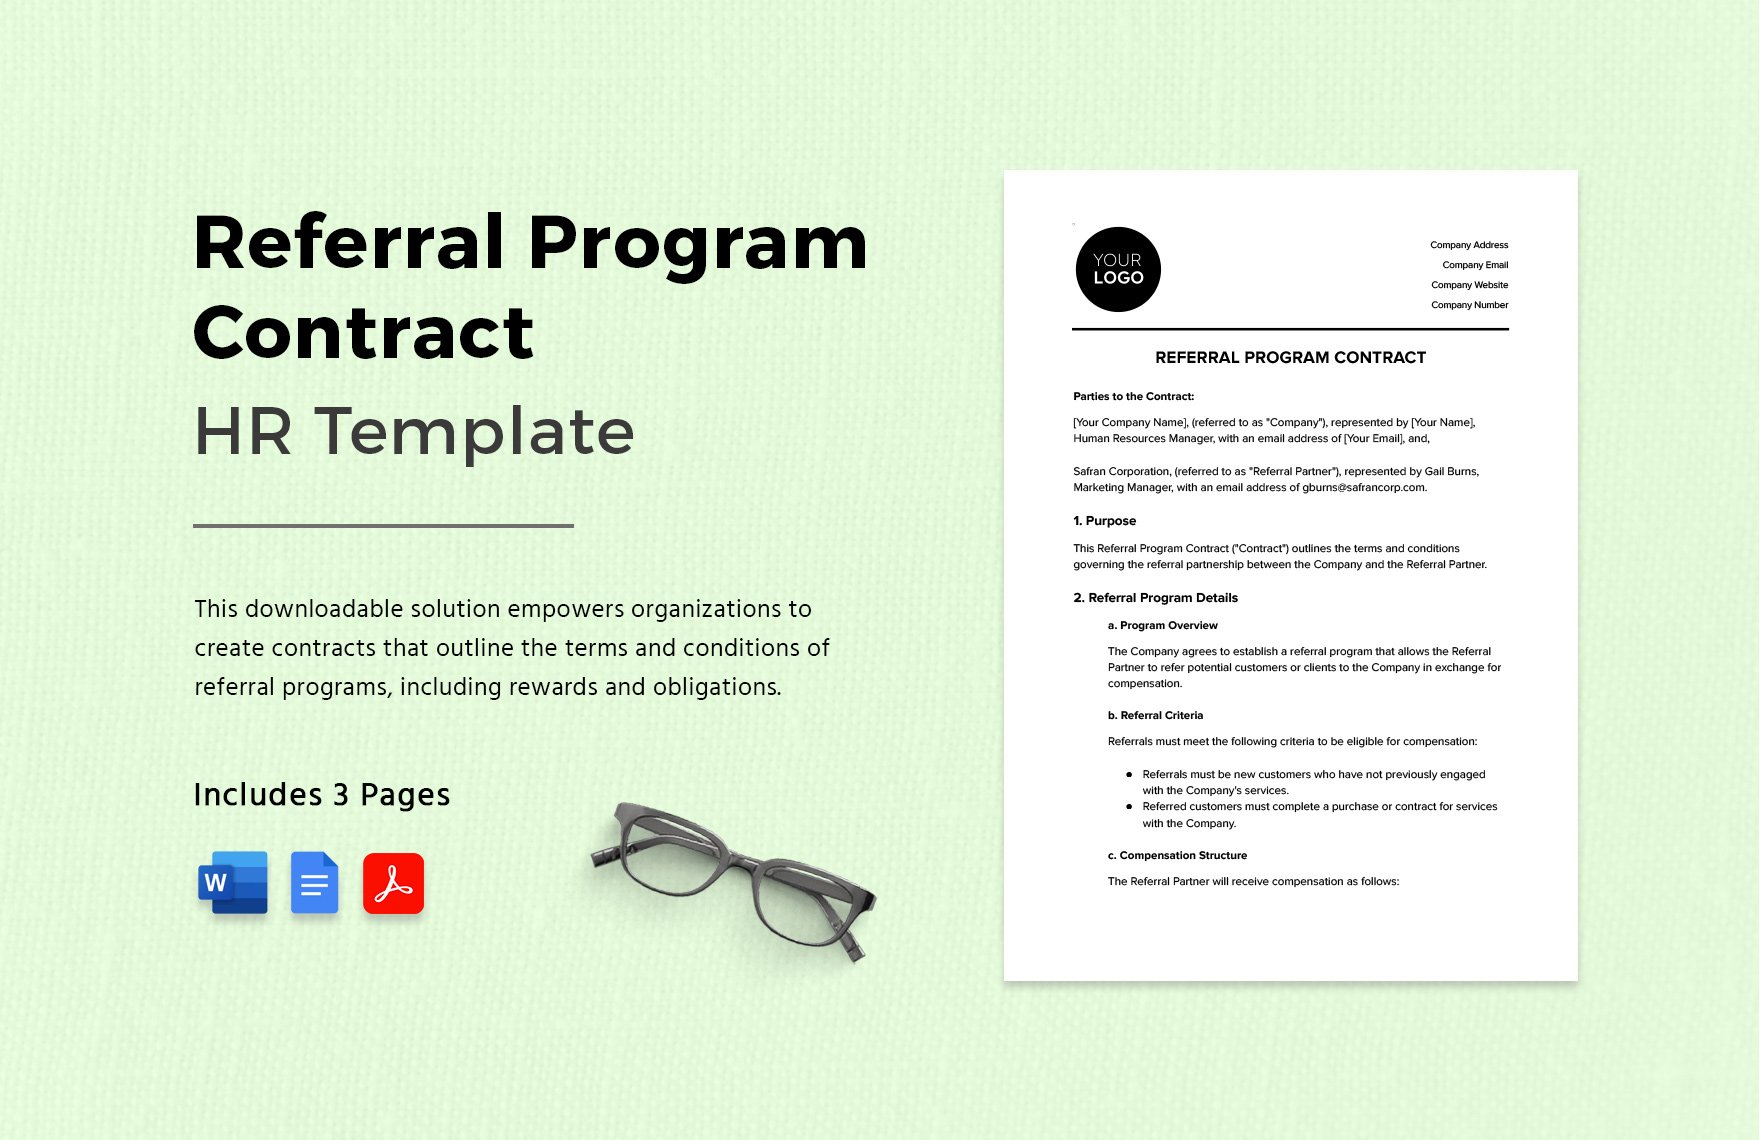 Referral Program Contract HR Template in Word, Google Docs, PDF